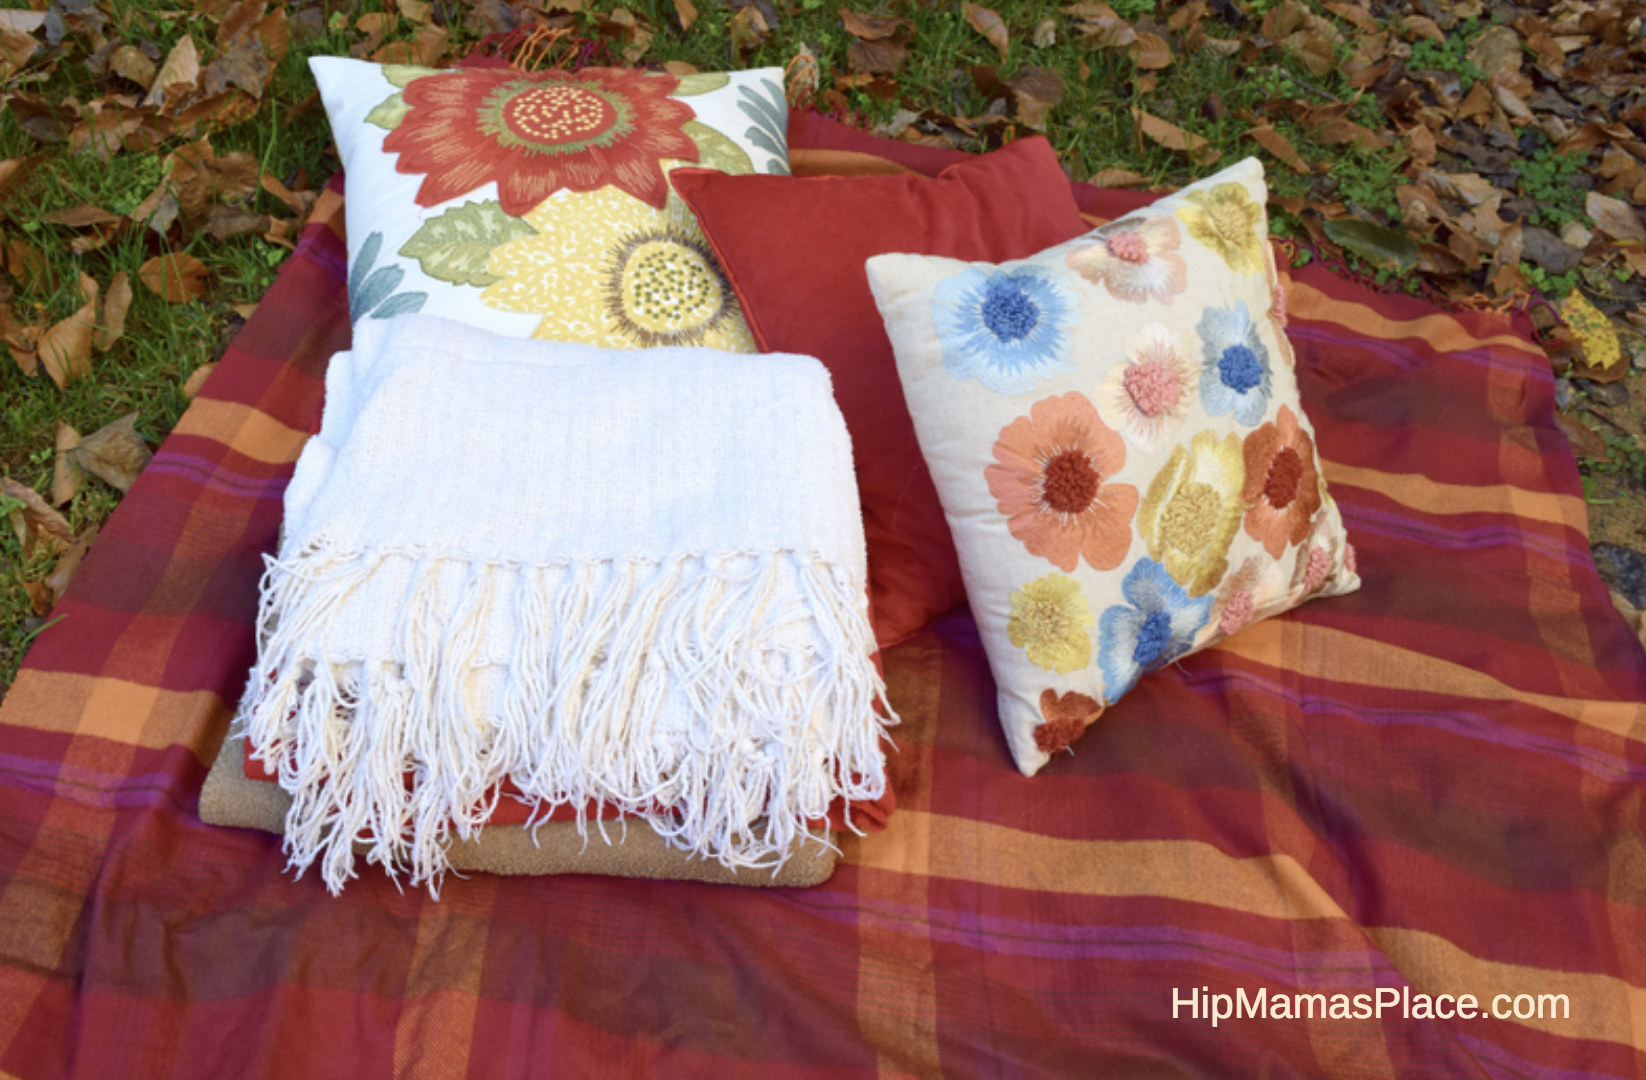 For a successful and fun fall picnic, toss blankets and floor pillows on the ground to create nesting spots.